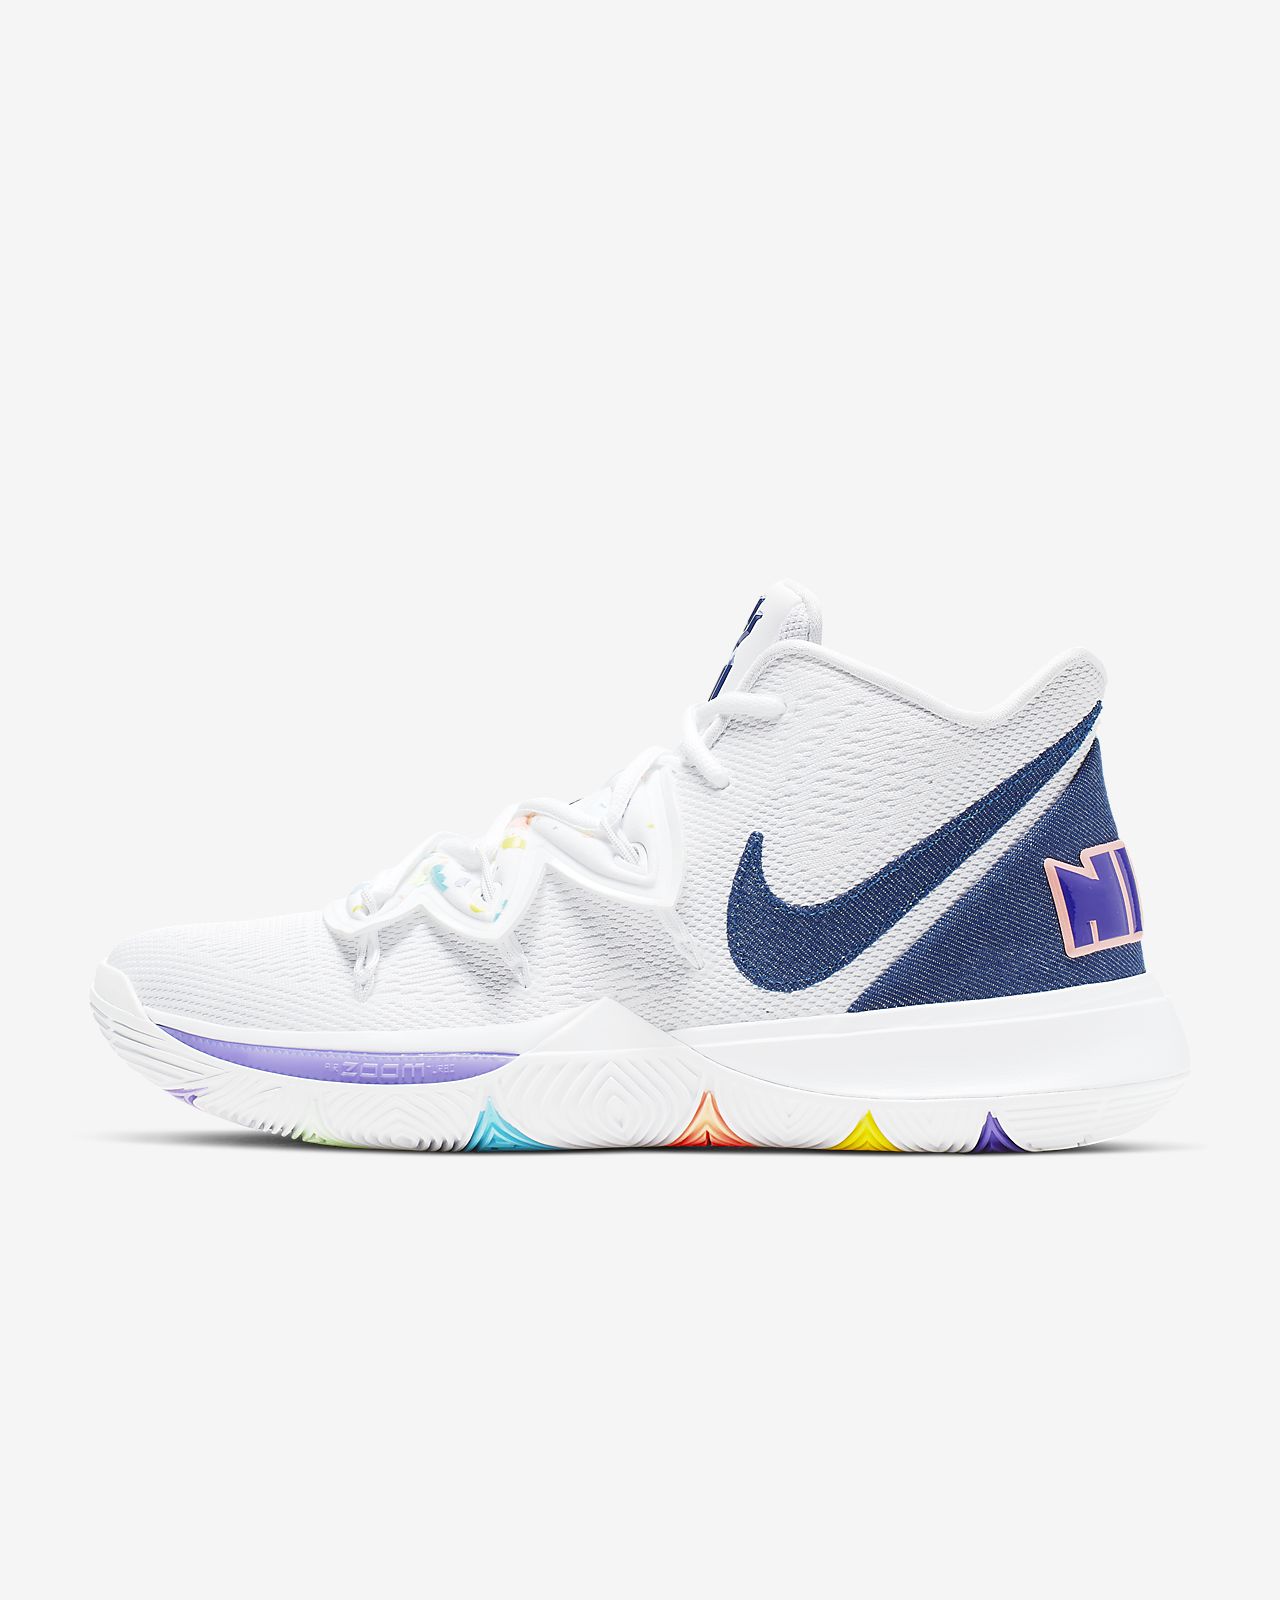 kyrie shoes 5 white